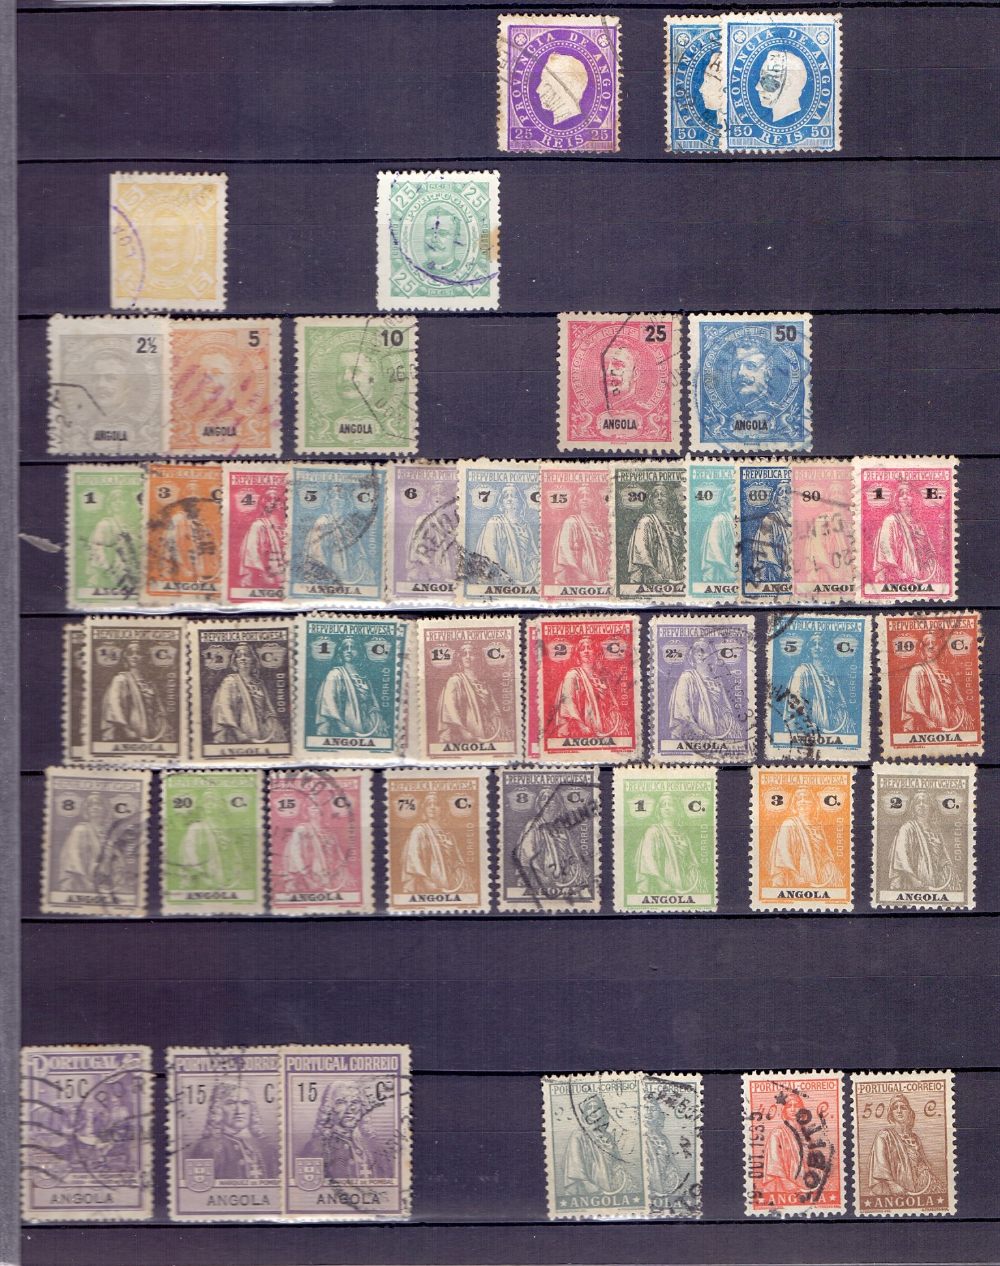 STAMPS : Stock book containing stamps mainly pre 1910 period from the colonies, Portuguese, Italian, - Image 2 of 3